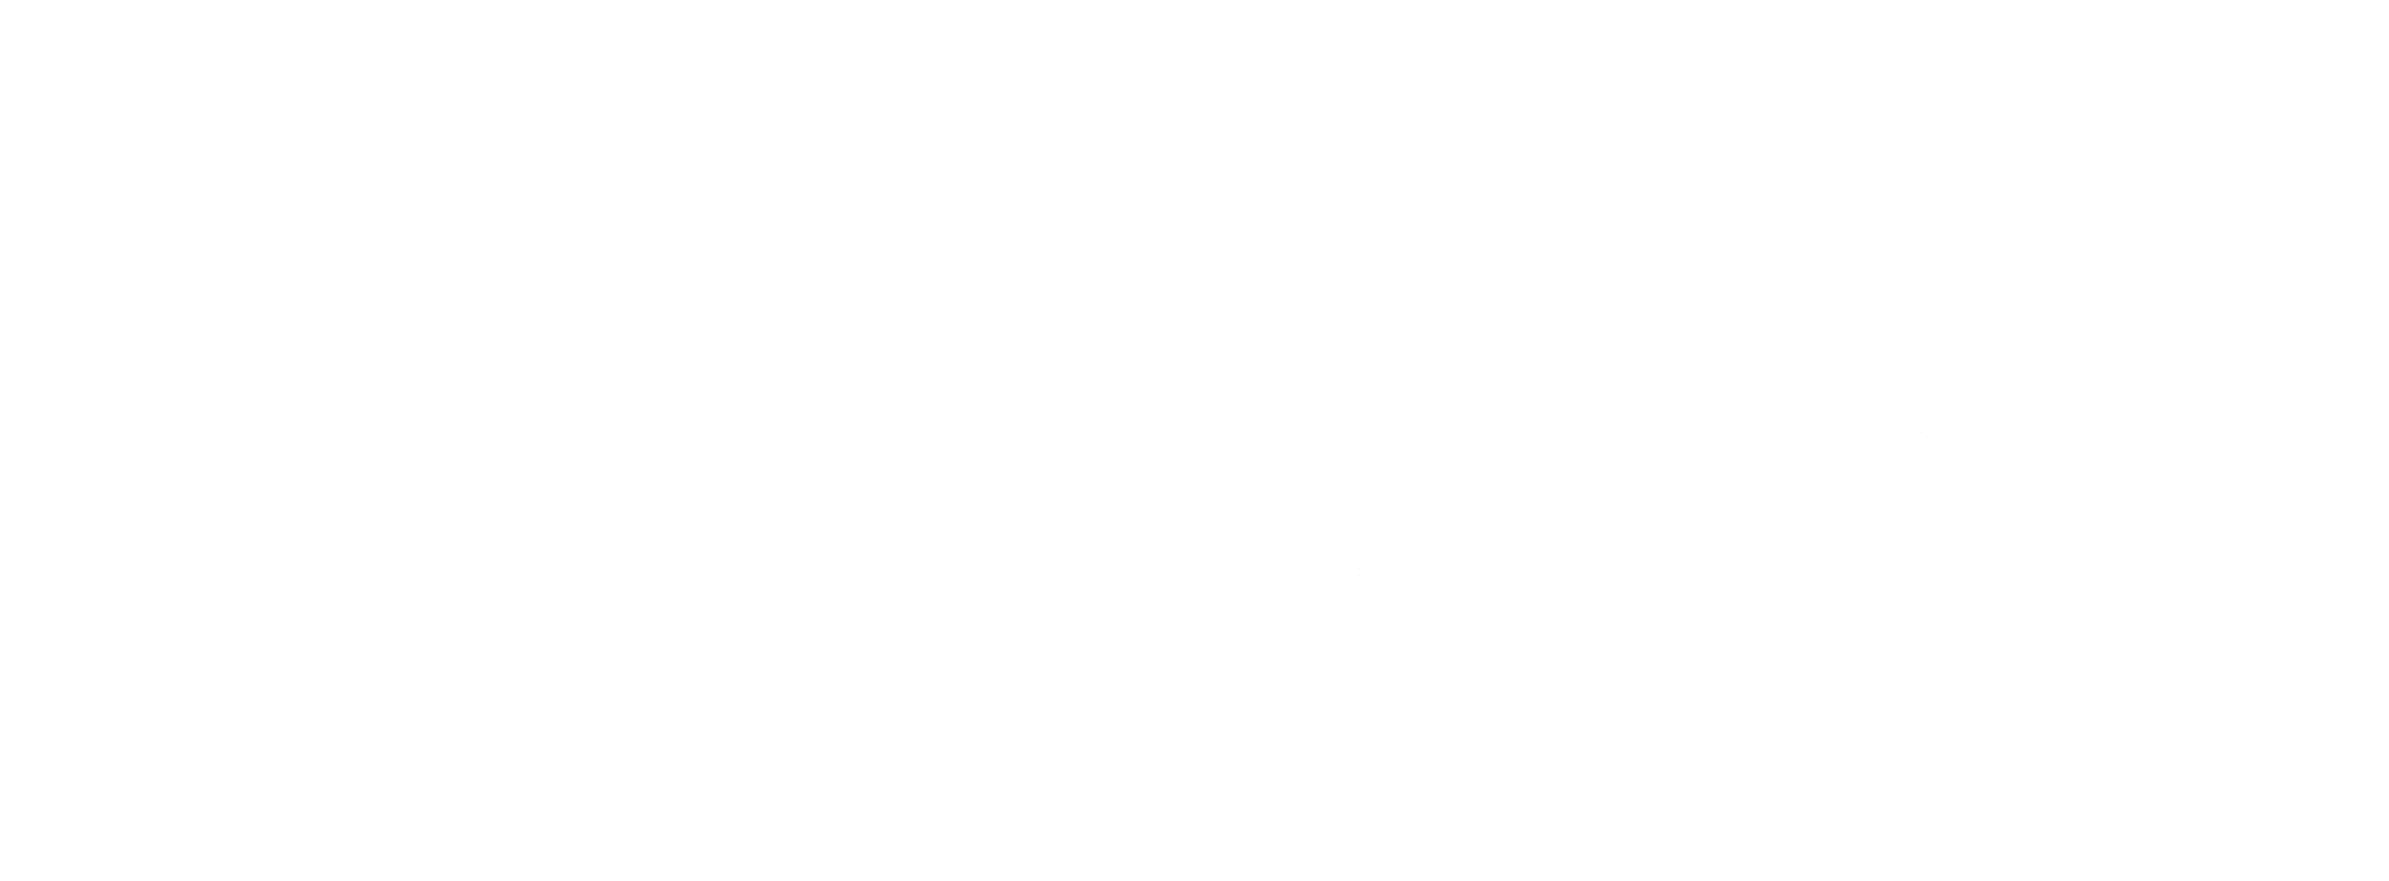 espn-1-logo-black-and-white.png